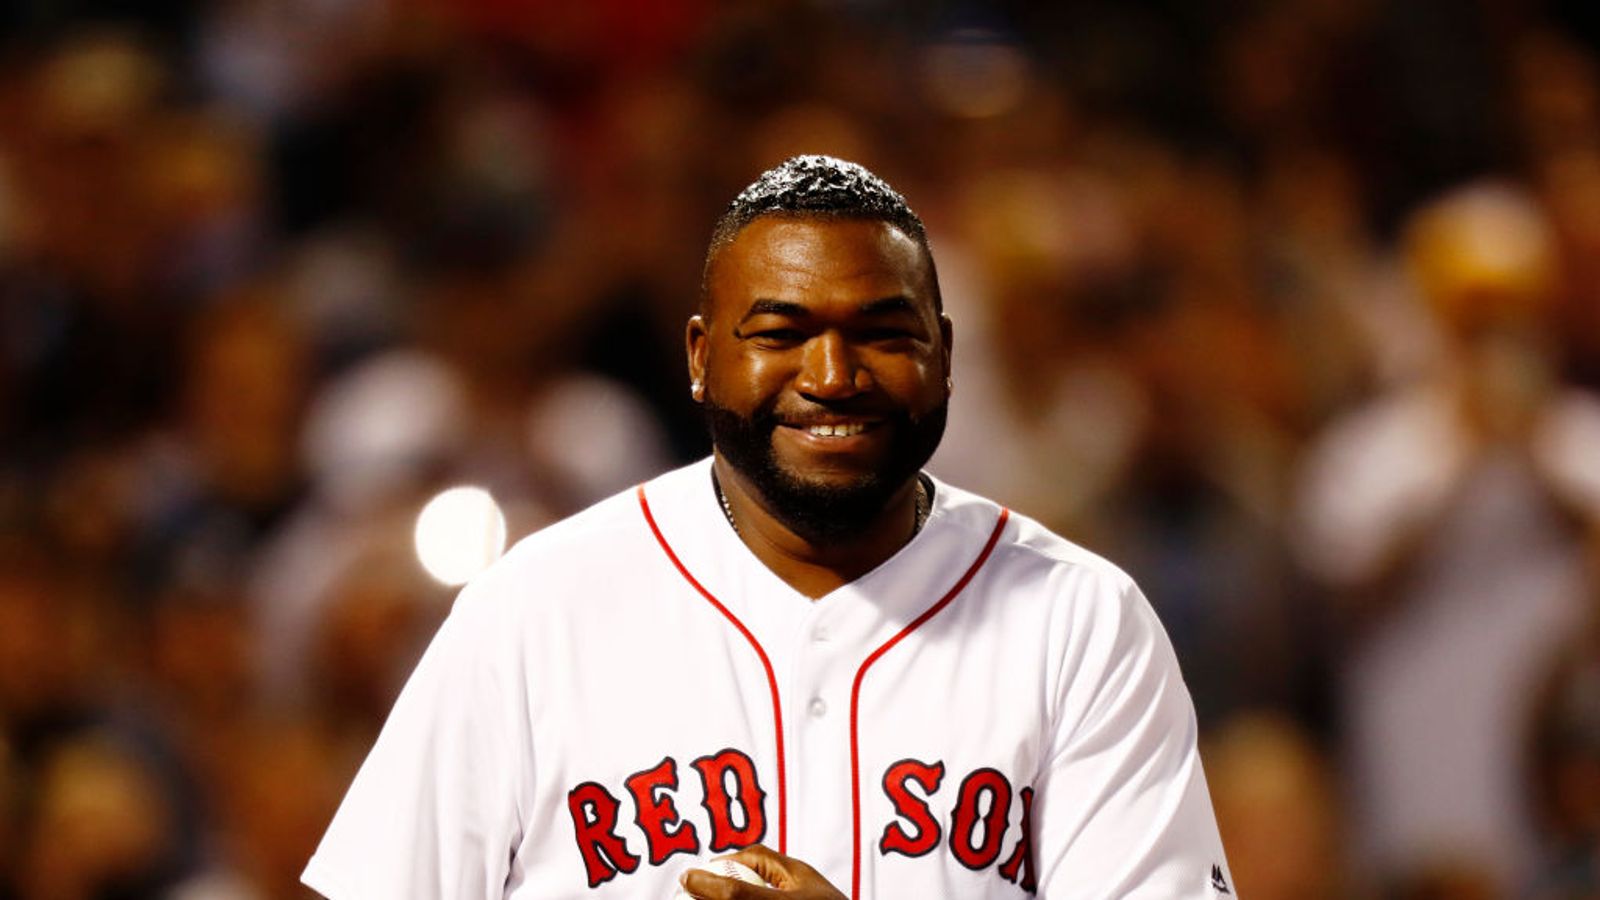 Ortiz is greatest Red Sox of all time